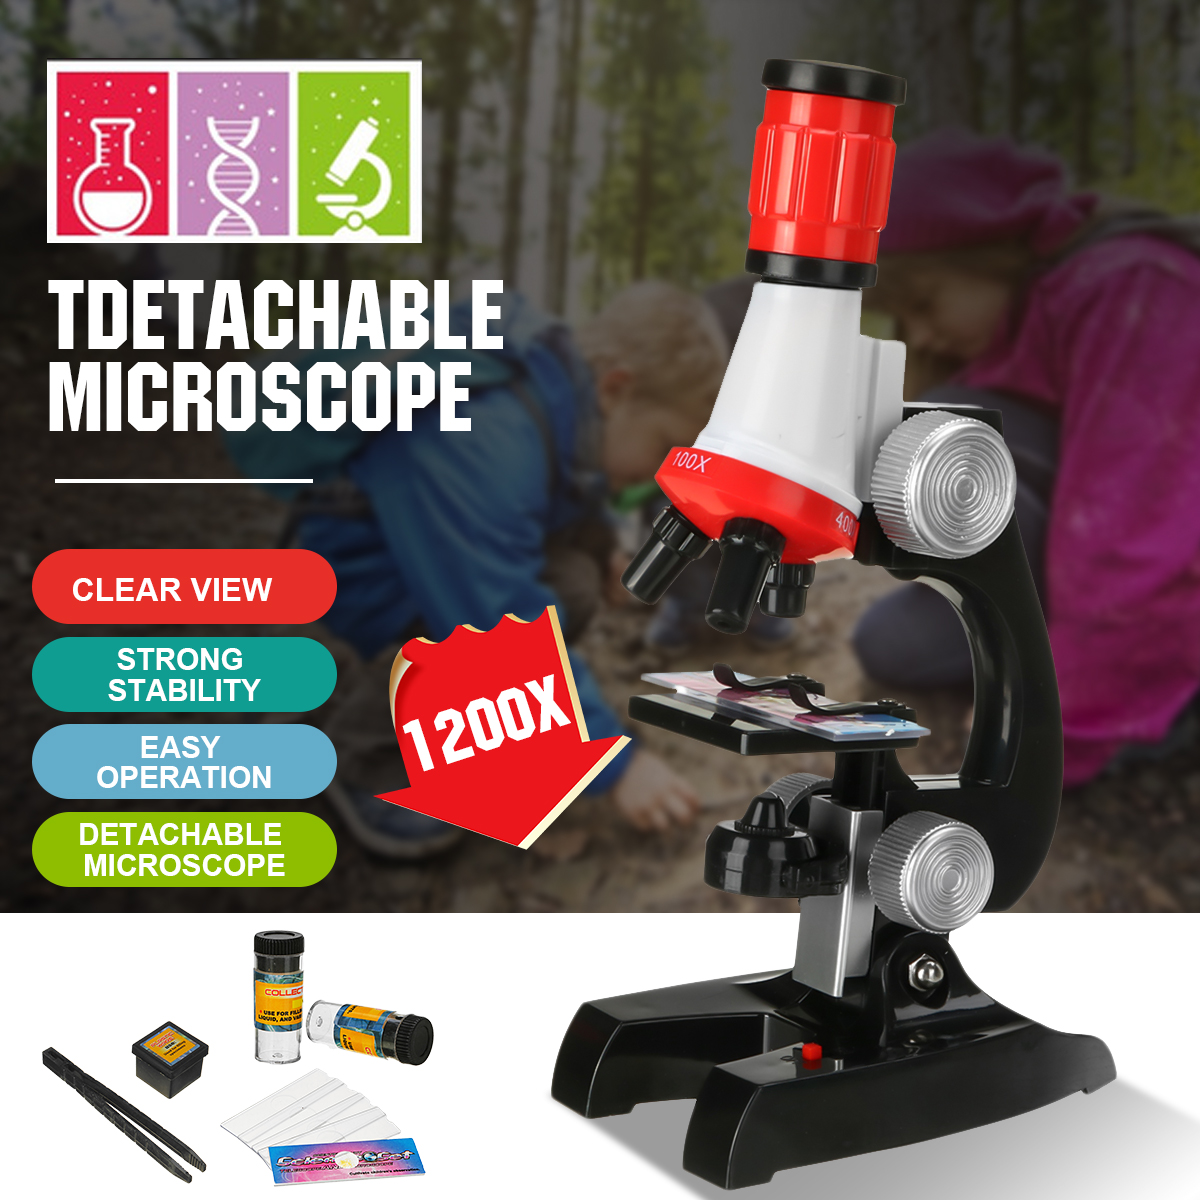 Children-Biological-Microscope-Kit-Lab-LED-100X-400X-1200X-Home-School-Science-Educational-Toy-Gift--1903472-1